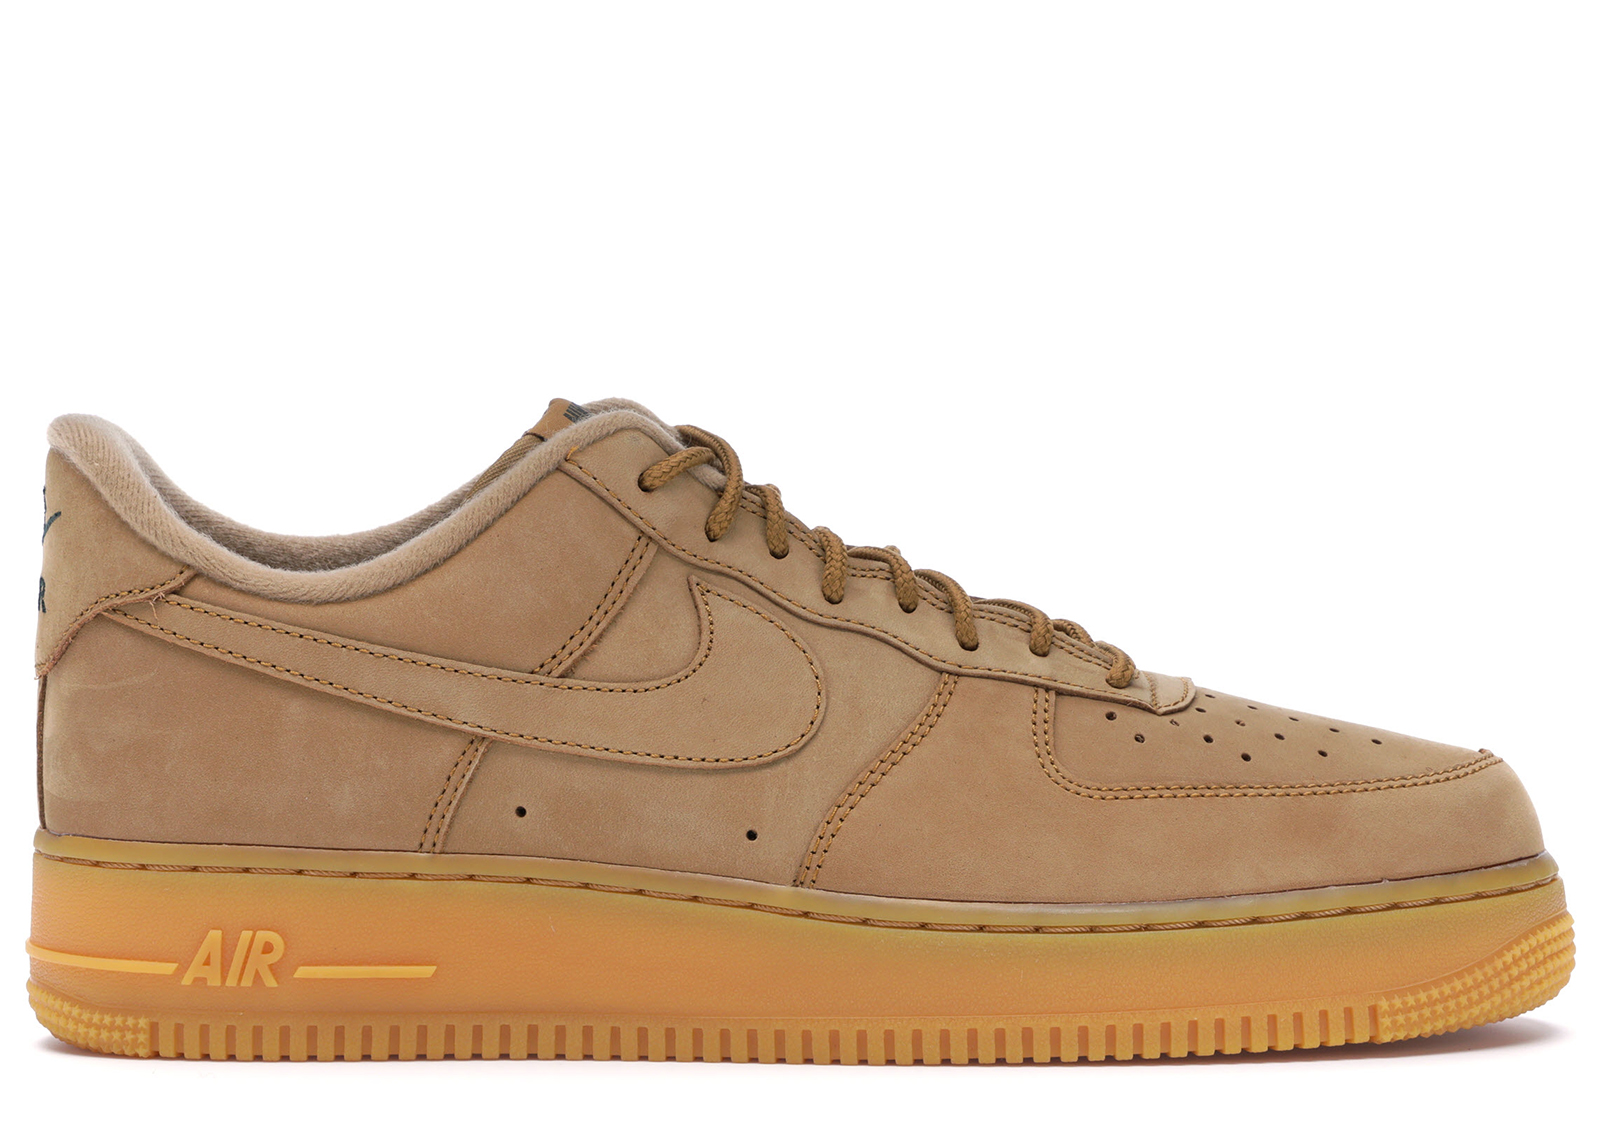 nike air force 1 low flax 2018